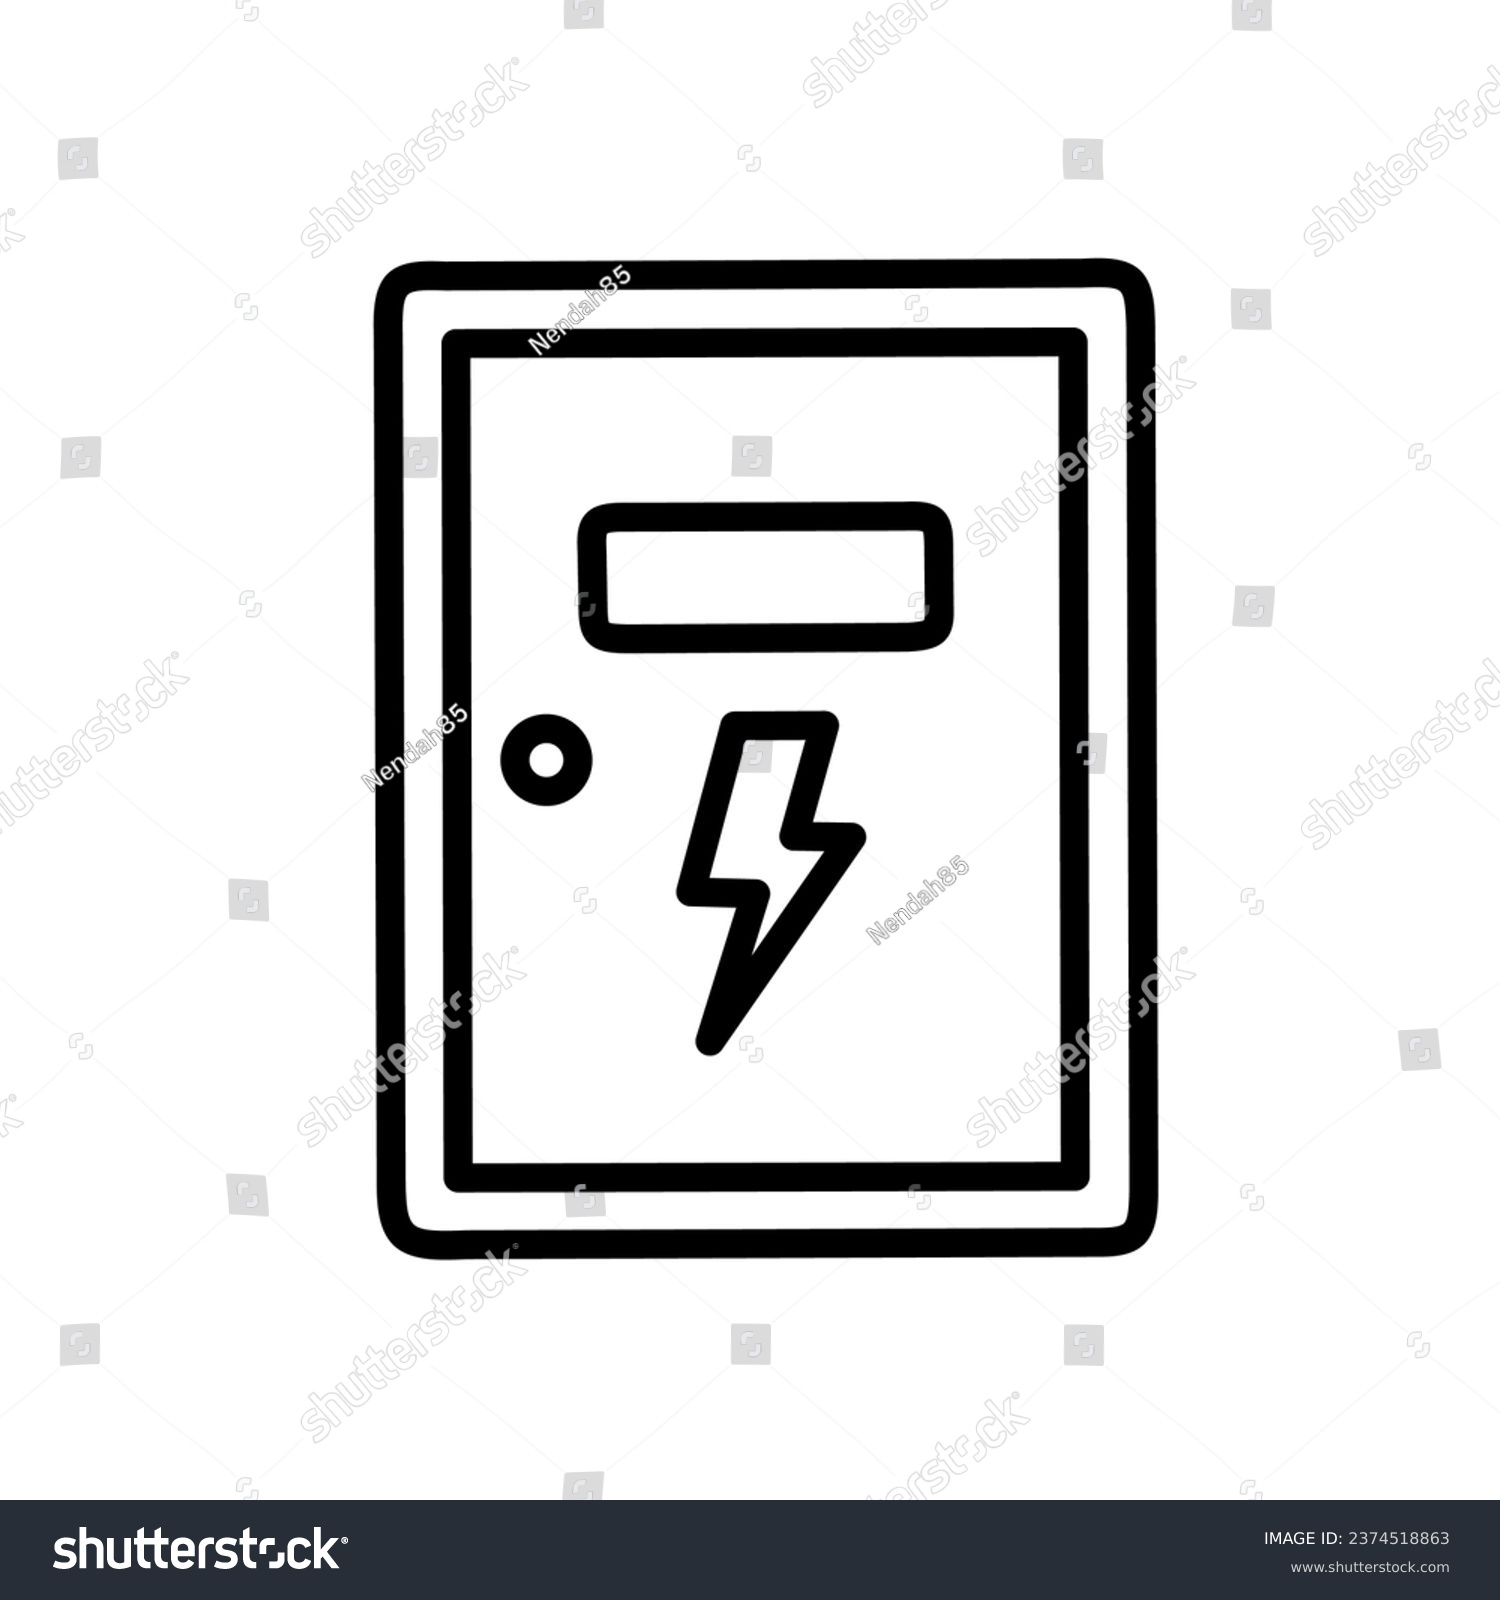 SVG of electrical panel box icon with line design svg